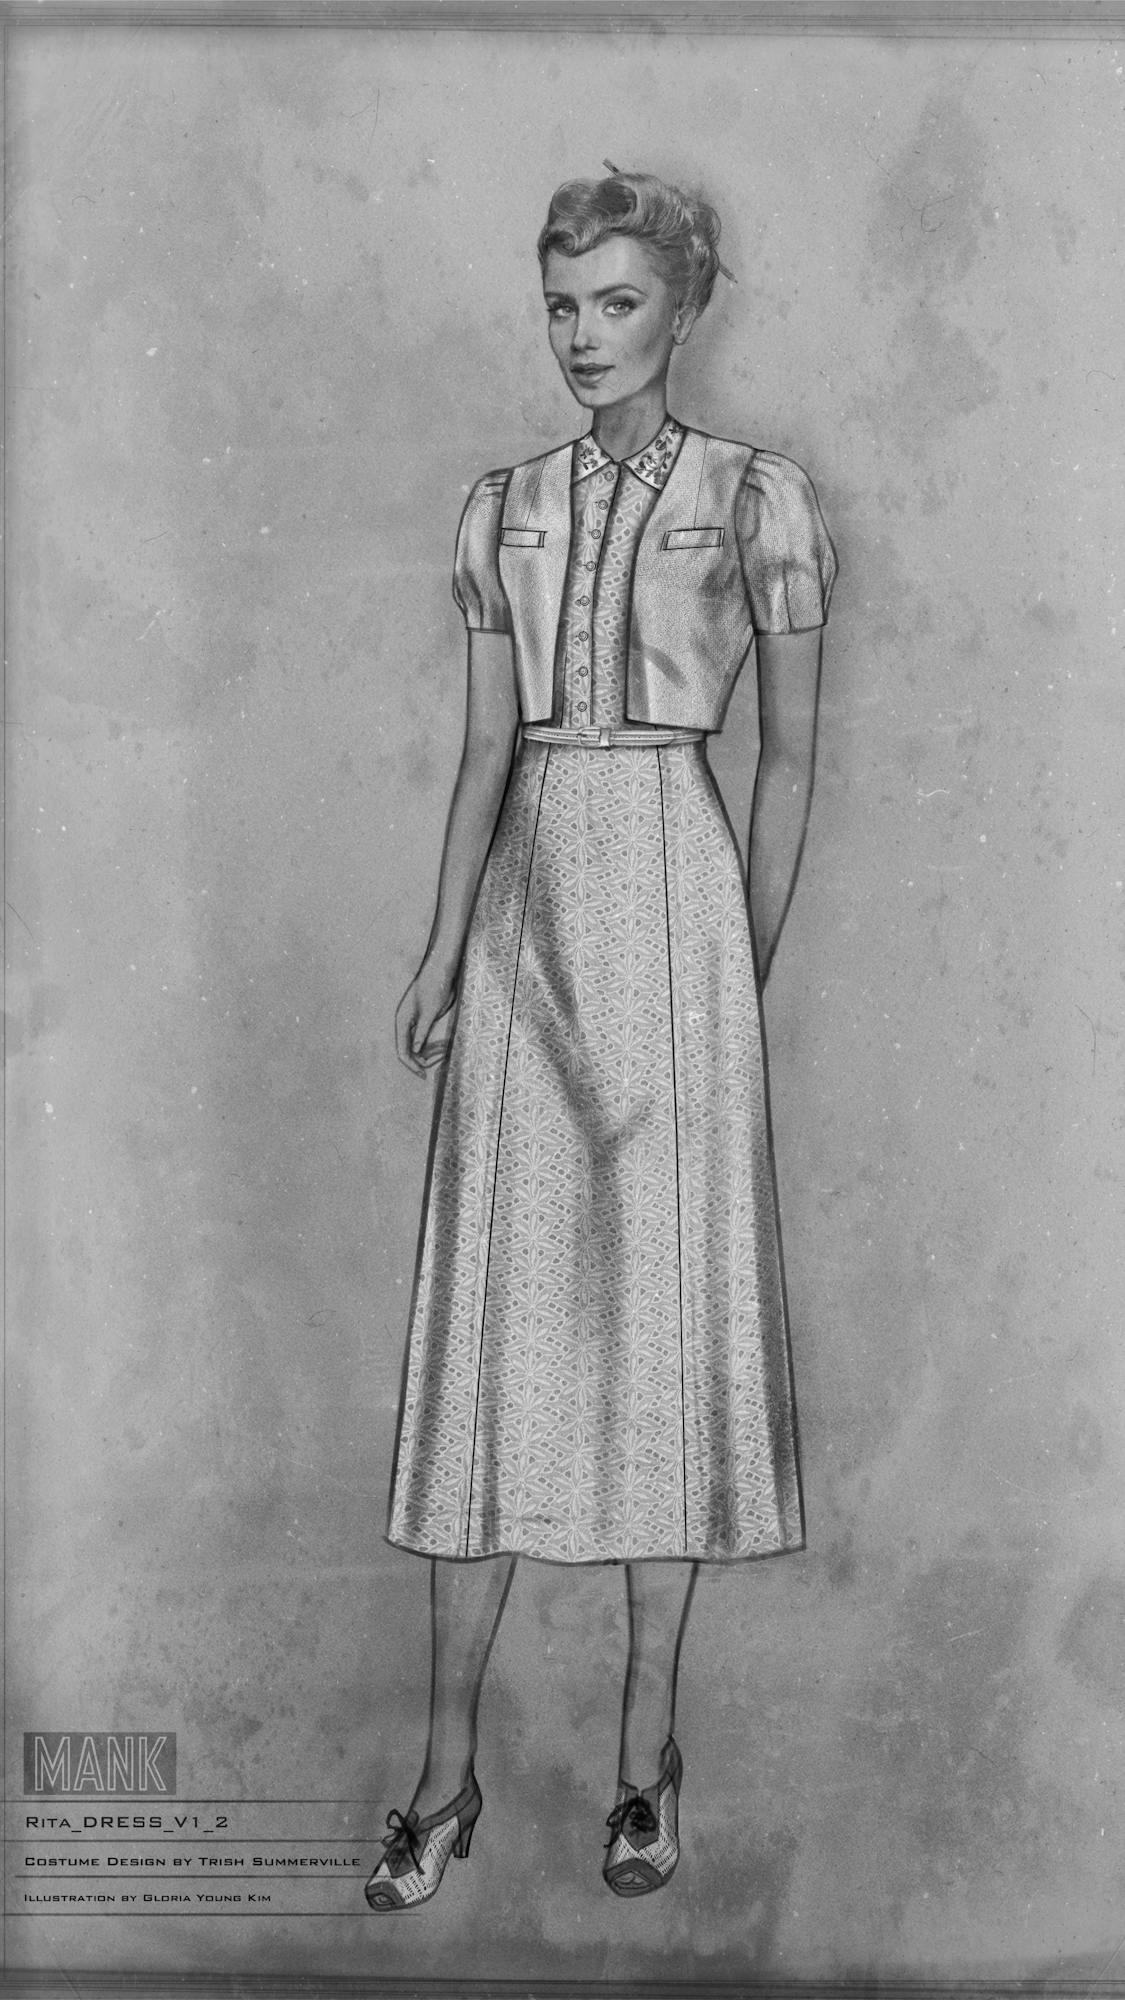 Costume sketch of Rita Alexander with her hair pulled back, wearing a belted dress, sensible heels, and short-sleeve bolero.